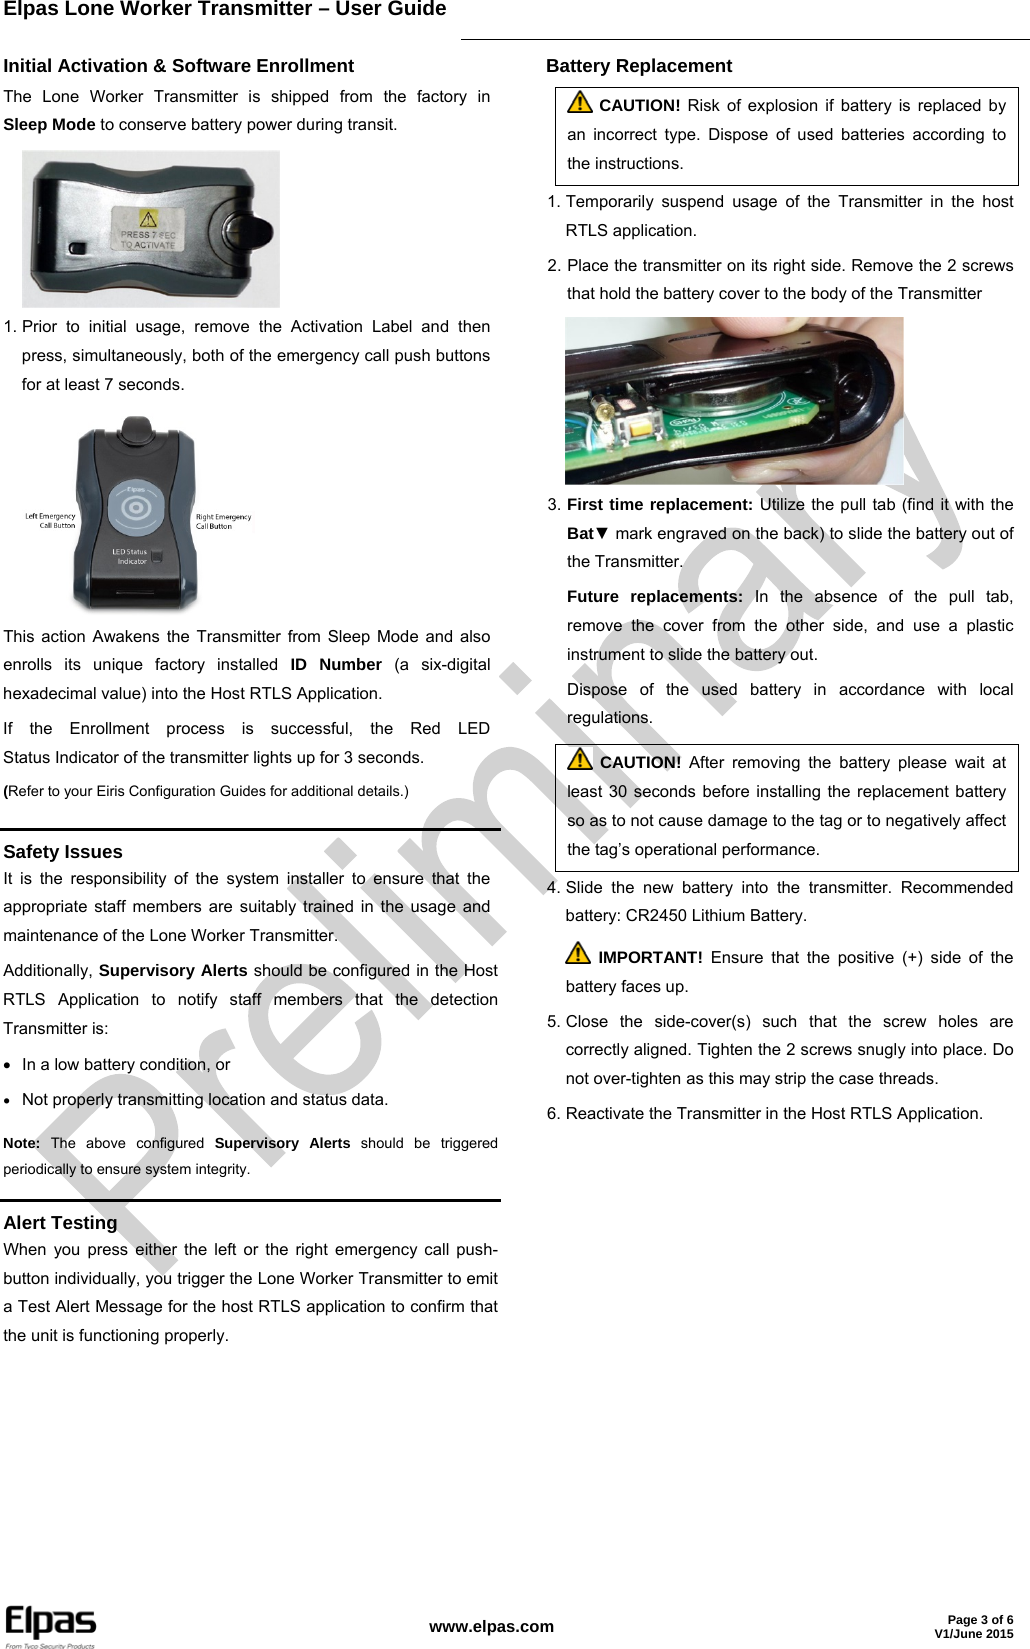 Elpas Lone Worker Transmitter – User Guide     www.elpas.com Page 3 of 6V1/June 2015  Initial Activation &amp; Software Enrollment The Lone Worker Transmitter is shipped from the factory in Sleep Mode to conserve battery power during transit.  1. Prior to initial usage, remove the Activation Label and then press, simultaneously, both of the emergency call push buttons for at least 7 seconds.  This action Awakens the Transmitter from Sleep Mode and also enrolls its unique factory installed ID Number (a six-digital hexadecimal value) into the Host RTLS Application. If the Enrollment process is successful, the Red LED Status Indicator of the transmitter lights up for 3 seconds. (Refer to your Eiris Configuration Guides for additional details.) Battery Replacement  CAUTION! Risk of explosion if battery is replaced by an incorrect type. Dispose of used batteries according to the instructions. 1. Temporarily suspend usage of the Transmitter in the host RTLS application. 2. Place the transmitter on its right side. Remove the 2 screws that hold the battery cover to the body of the Transmitter  3. First time replacement: Utilize the pull tab (find it with the Bat▼ mark engraved on the back) to slide the battery out of the Transmitter. Future replacements: In the absence of the pull tab, remove the cover from the other side, and use a plastic instrument to slide the battery out. Dispose of the used battery in accordance with local regulations.  CAUTION! After removing the battery please wait at least 30 seconds before installing the replacement battery so as to not cause damage to the tag or to negatively affect the tag’s operational performance. 4. Slide the new battery into the transmitter. Recommended battery: CR2450 Lithium Battery.  IMPORTANT! Ensure that the positive (+) side of the battery faces up. 5. Close the side-cover(s) such that the screw holes are correctly aligned. Tighten the 2 screws snugly into place. Do not over-tighten as this may strip the case threads. 6. Reactivate the Transmitter in the Host RTLS Application.   Safety Issues It is the responsibility of the system installer to ensure that the appropriate staff members are suitably trained in the usage and maintenance of the Lone Worker Transmitter. Additionally, Supervisory Alerts should be configured in the Host RTLS Application to notify staff members that the detection Transmitter is:   In a low battery condition, or  Not properly transmitting location and status data. Note: The above configured Supervisory Alerts should be triggered periodically to ensure system integrity.  Alert Testing When you press either the left or the right emergency call push-button individually, you trigger the Lone Worker Transmitter to emit a Test Alert Message for the host RTLS application to confirm that the unit is functioning properly. 